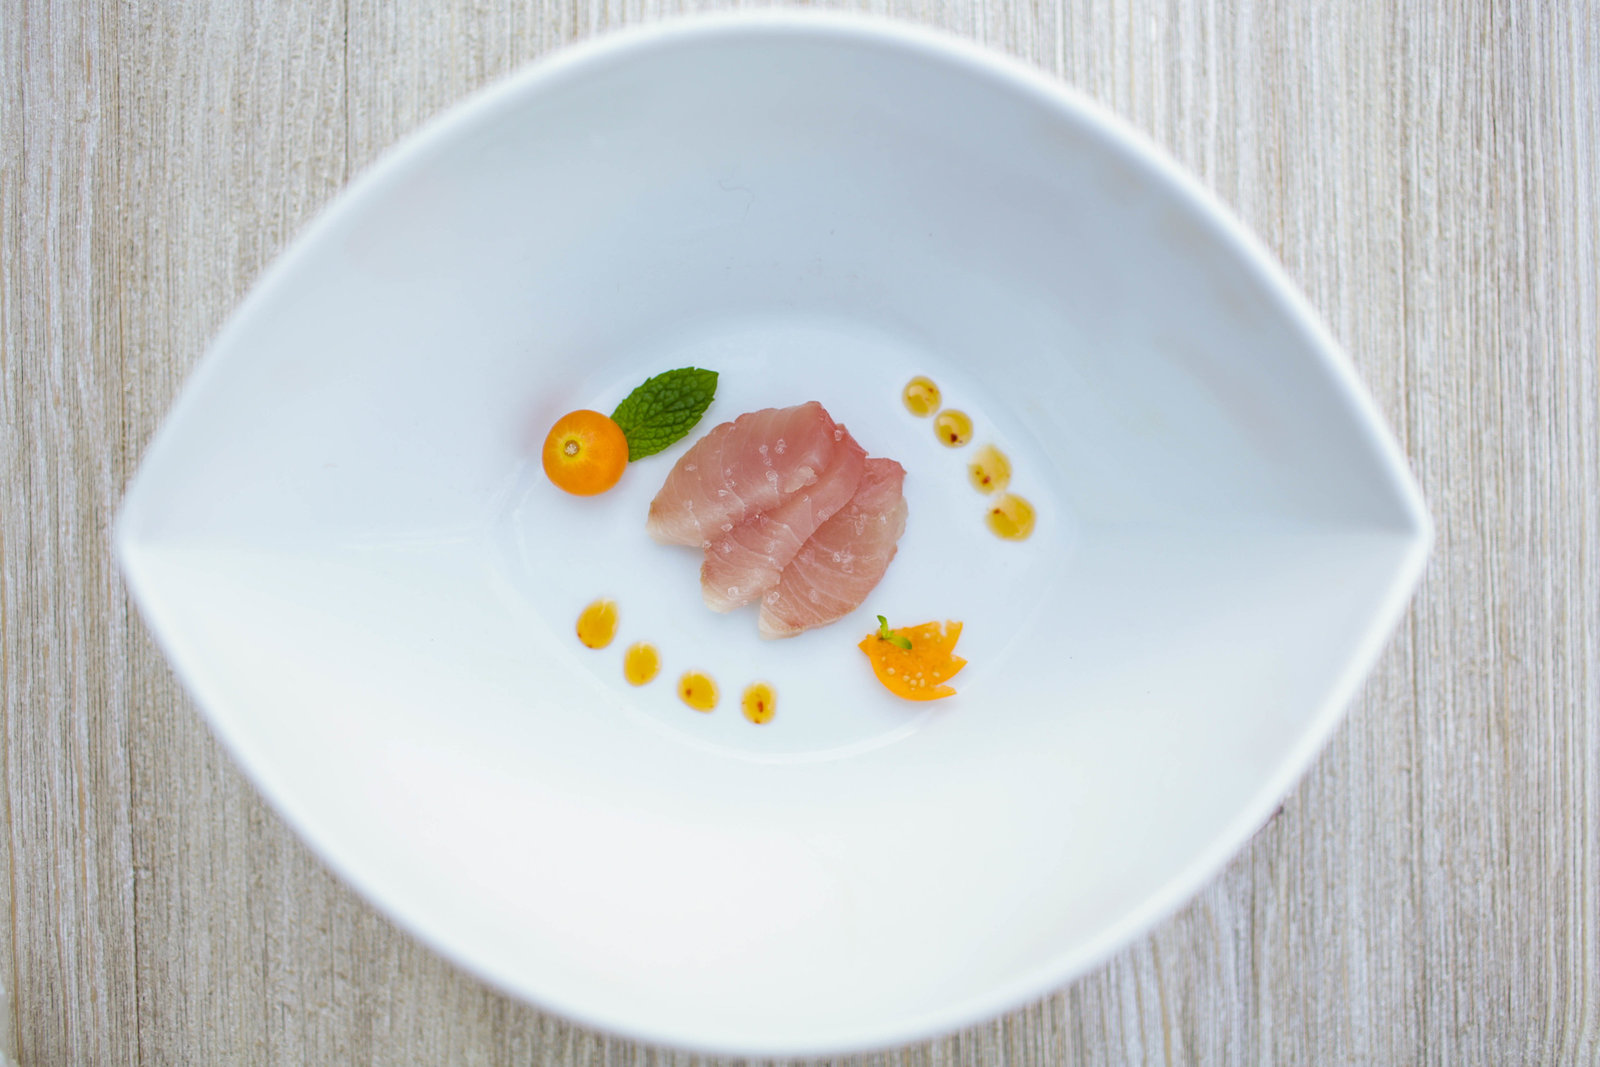 Sashimi is styled and photographed by Charleston food Photographer, Kate Timbers.